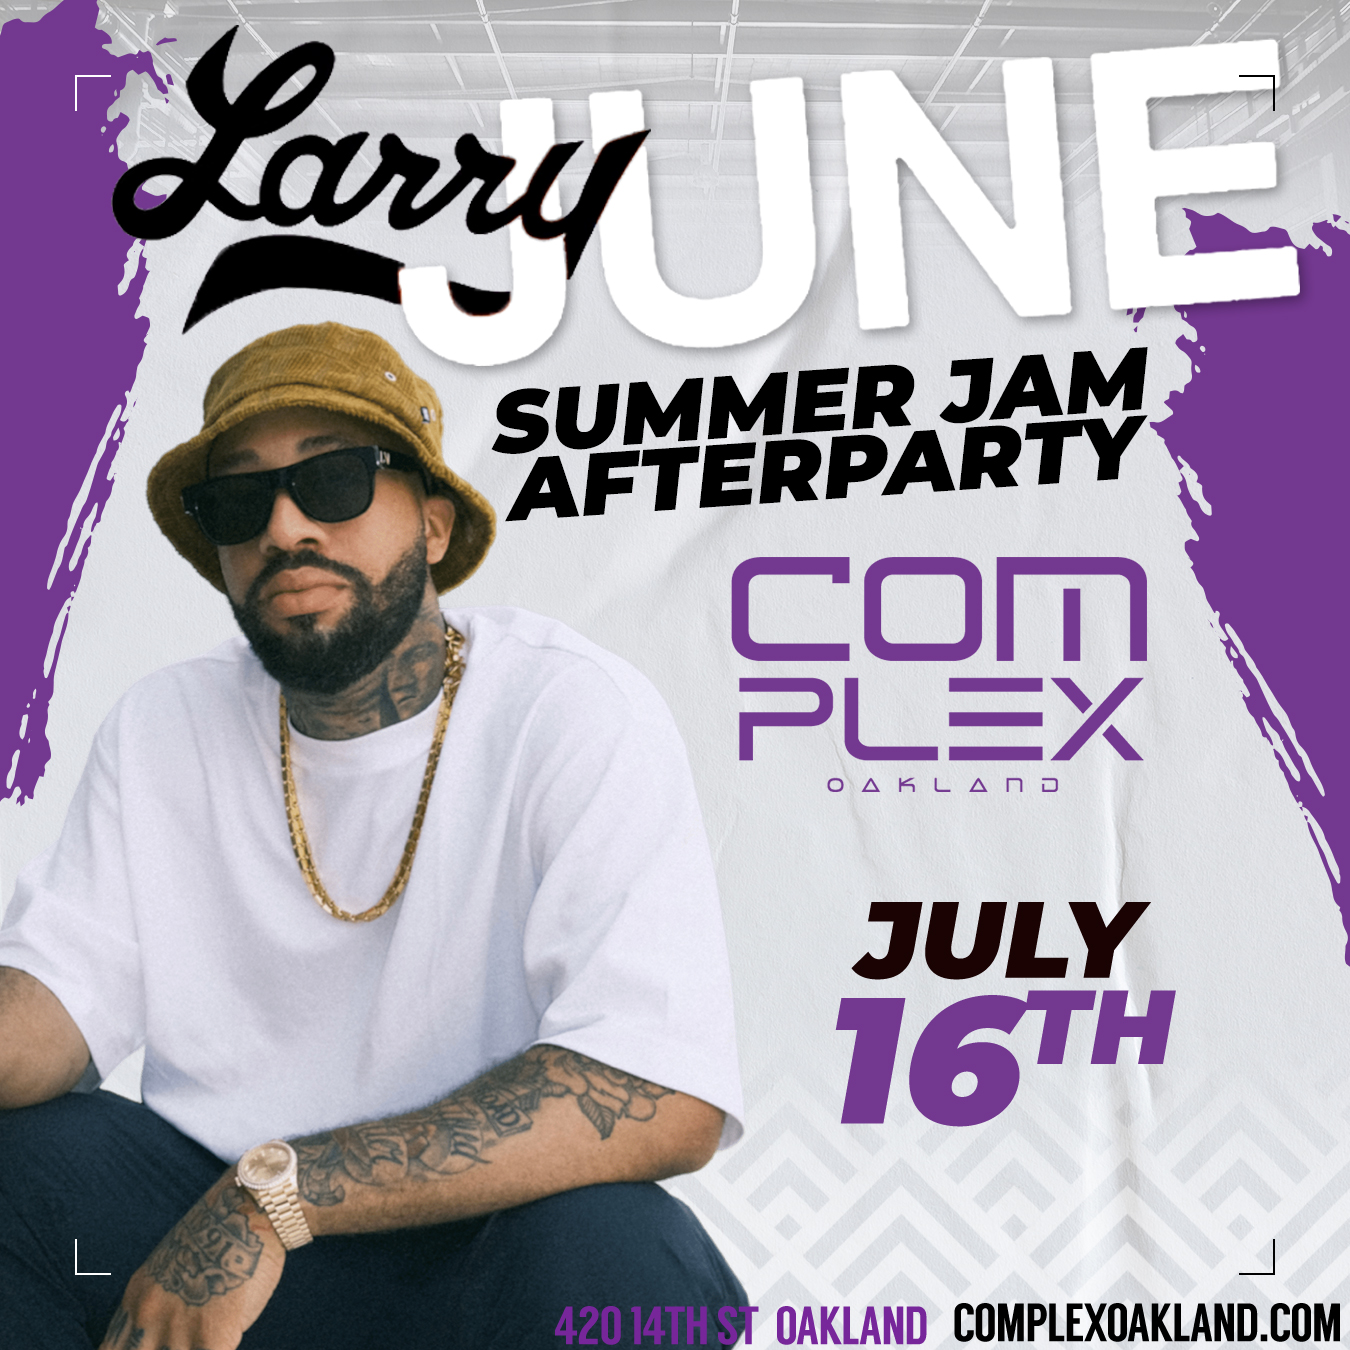 Buy Tickets to LARRY JUNE SUMMER JAM AFTERPARTY JULY 16TH in